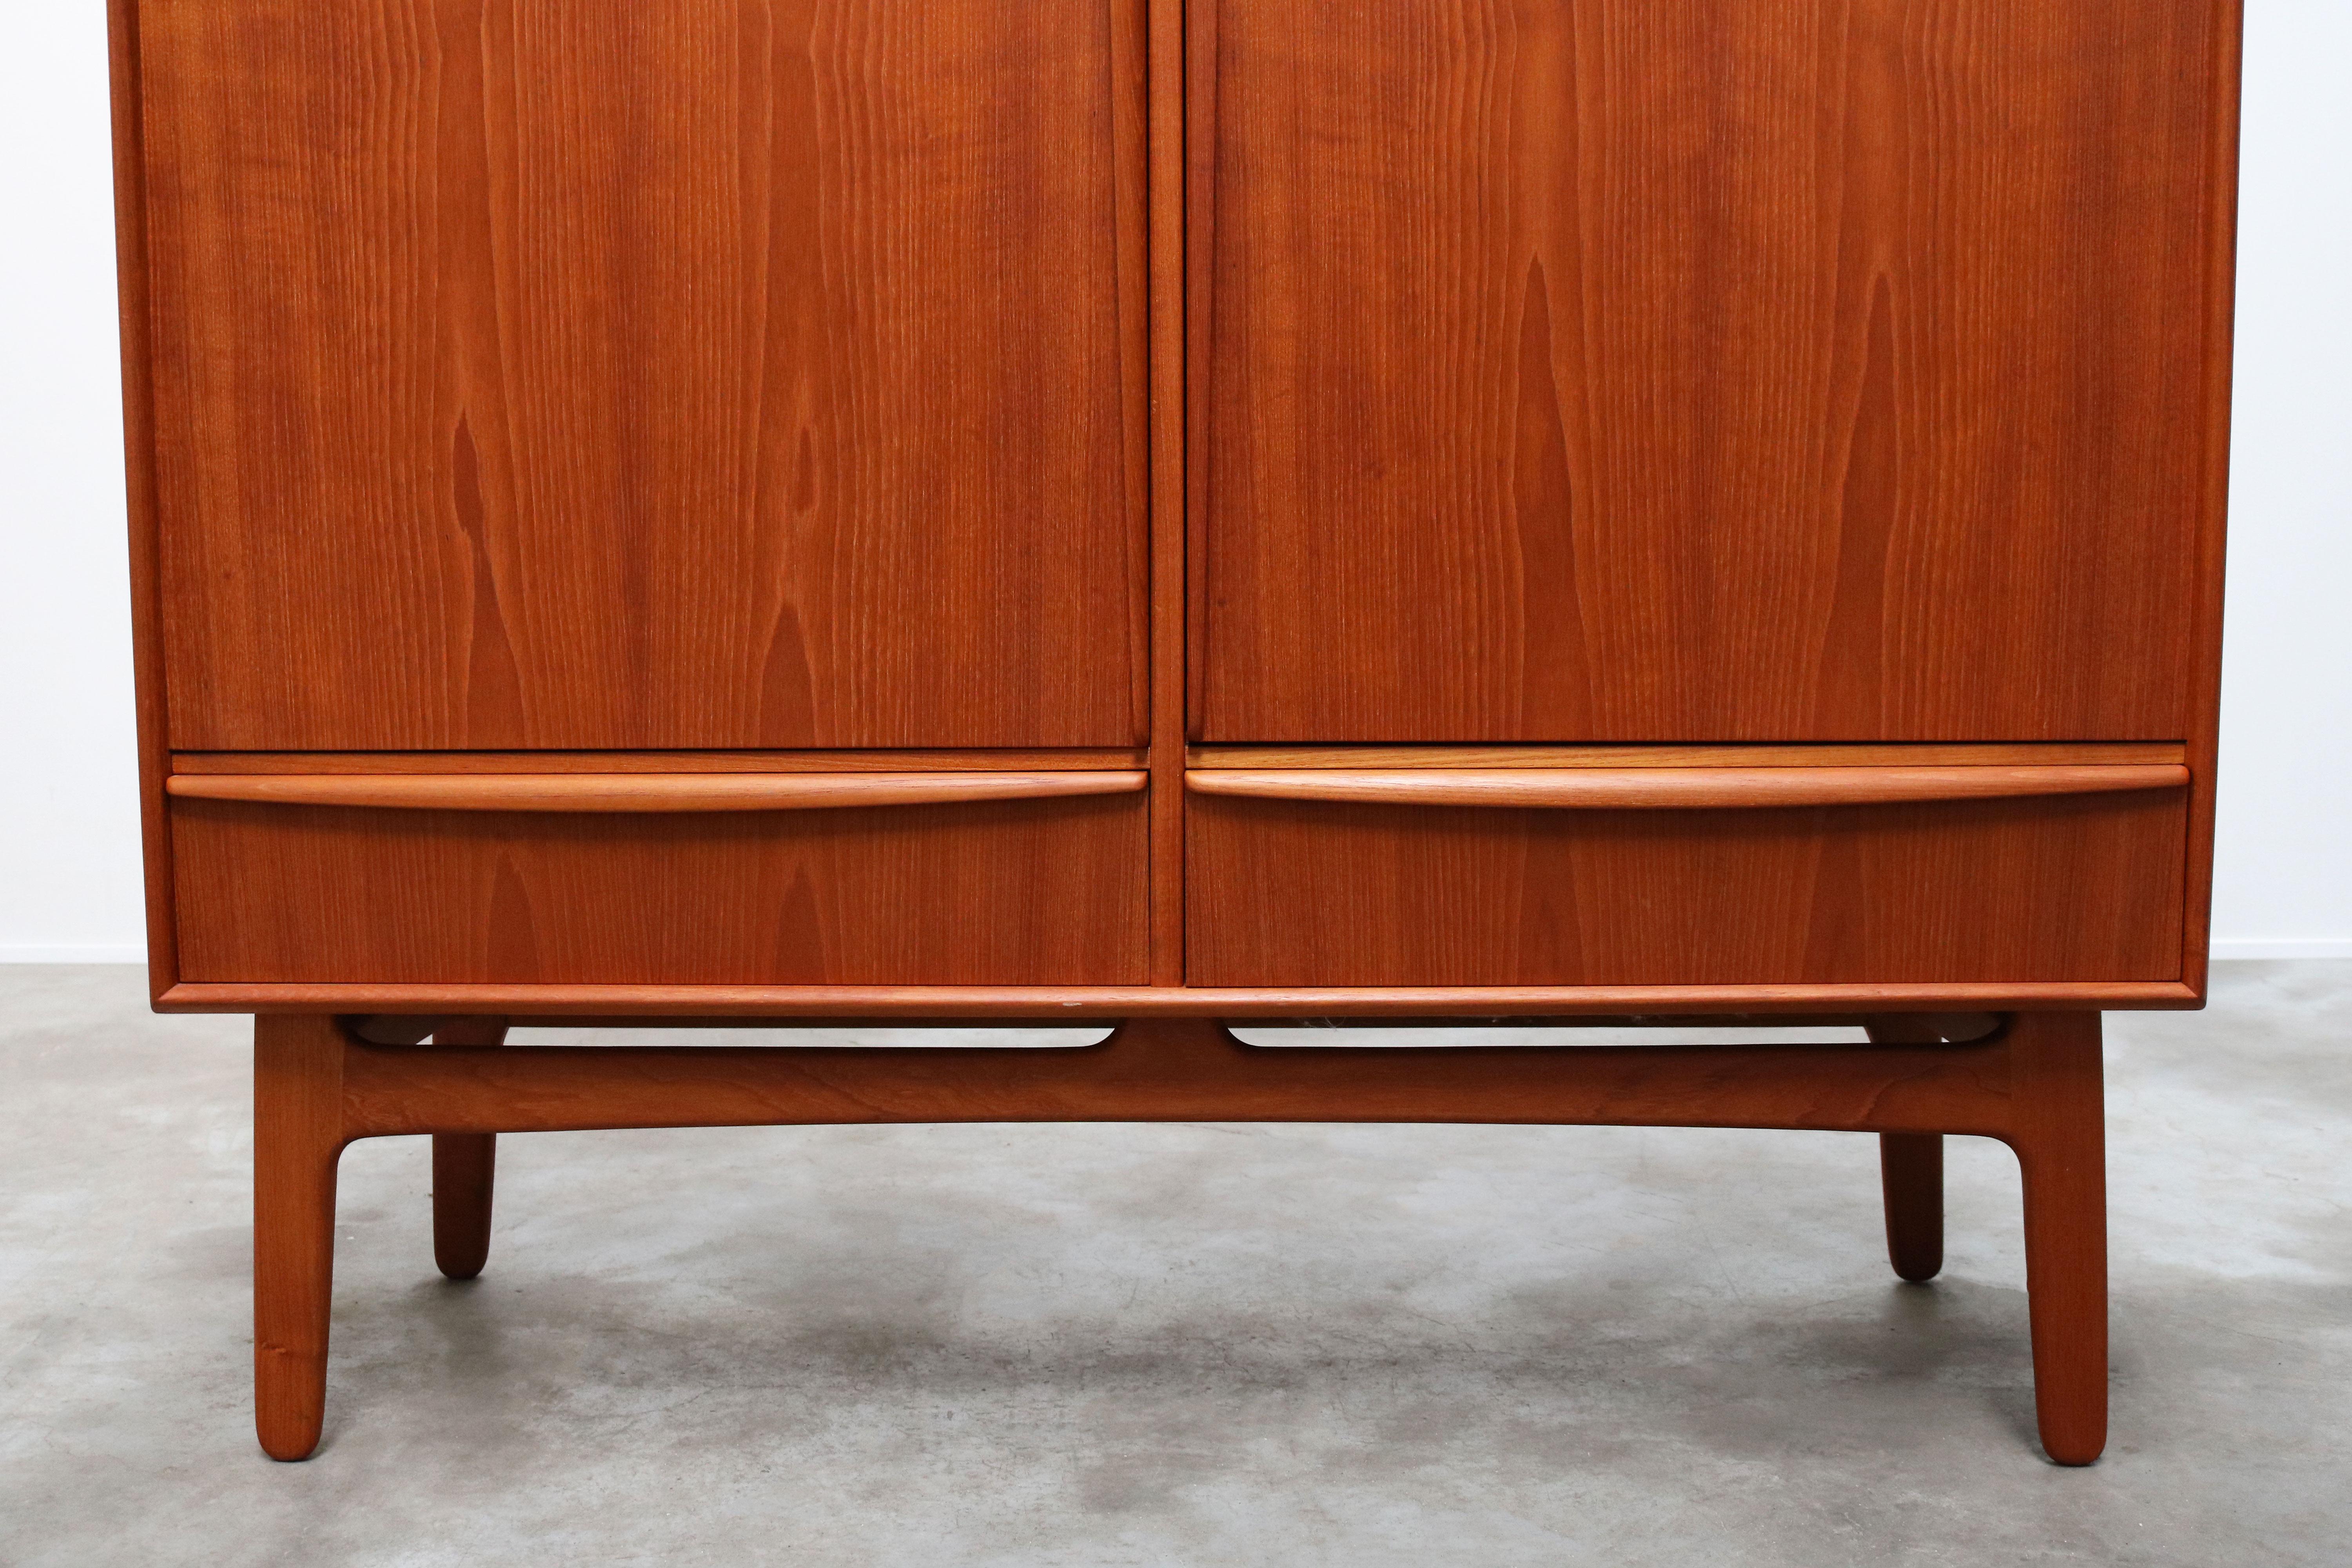 Magnificent Danish design highboard / cabinet designed by Svend Aage Madsen for K. Knudsen & son in the 1950s. Wonderful design with organic sculpted grips and base in solid teak. The cabinet has 2 drawers and multiple adjustable shelves , the